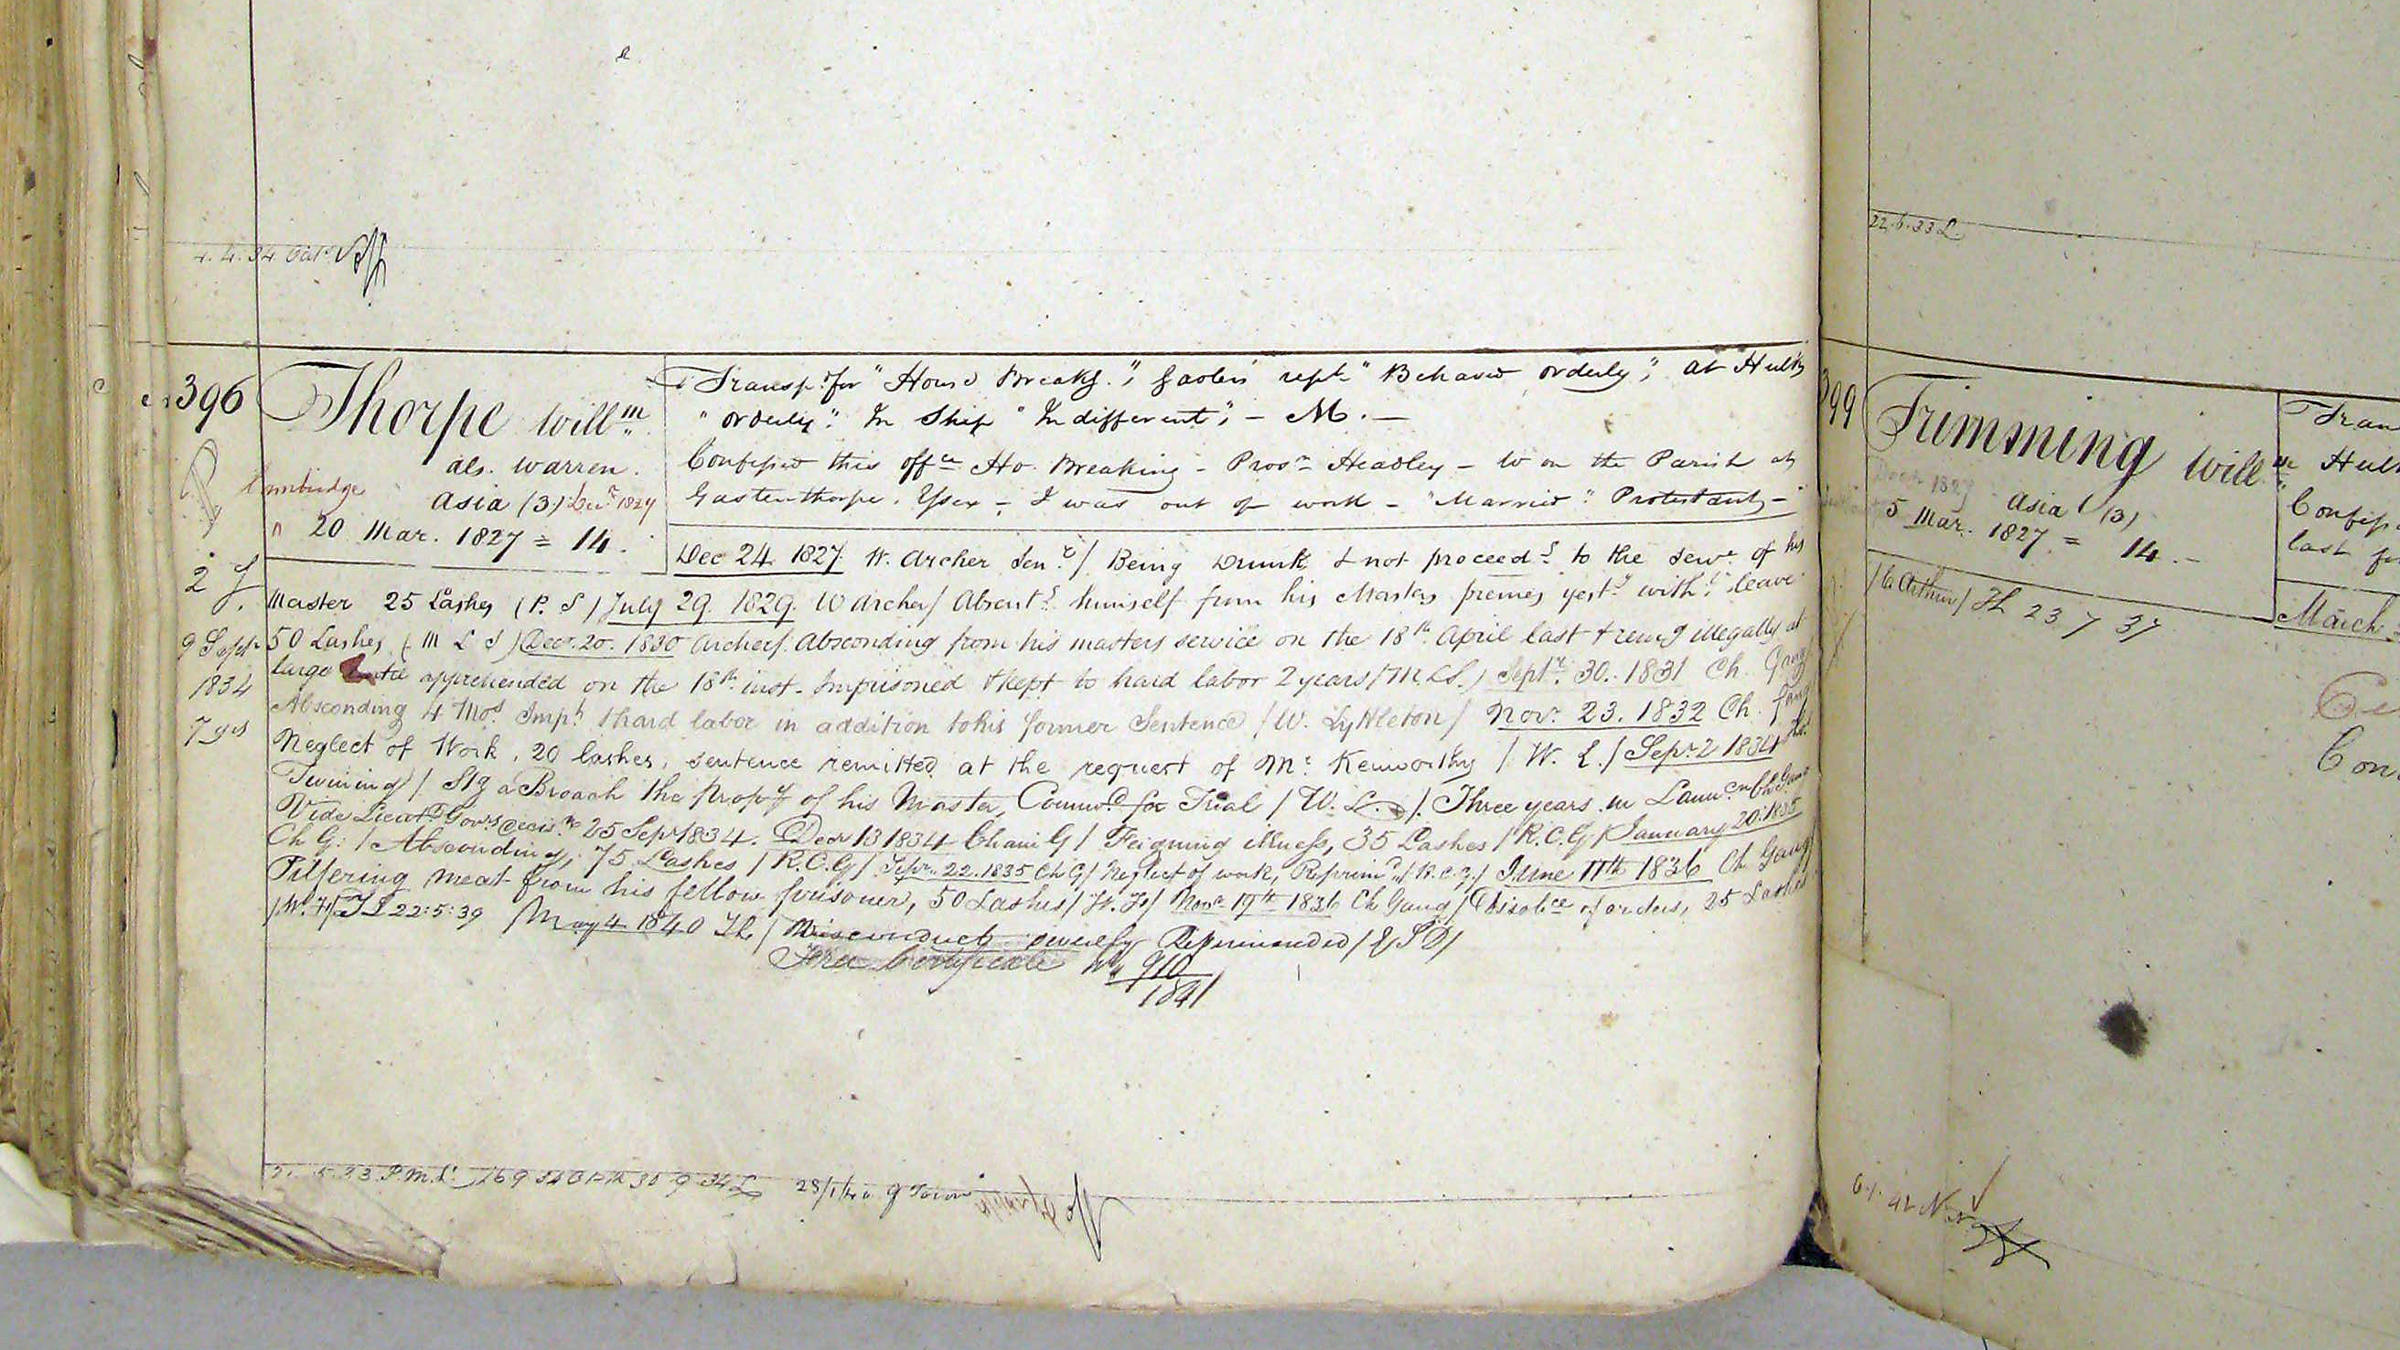 Excerpt from ledgers held as part of Brickendon Estate’s archives mentioning William Thorpe.